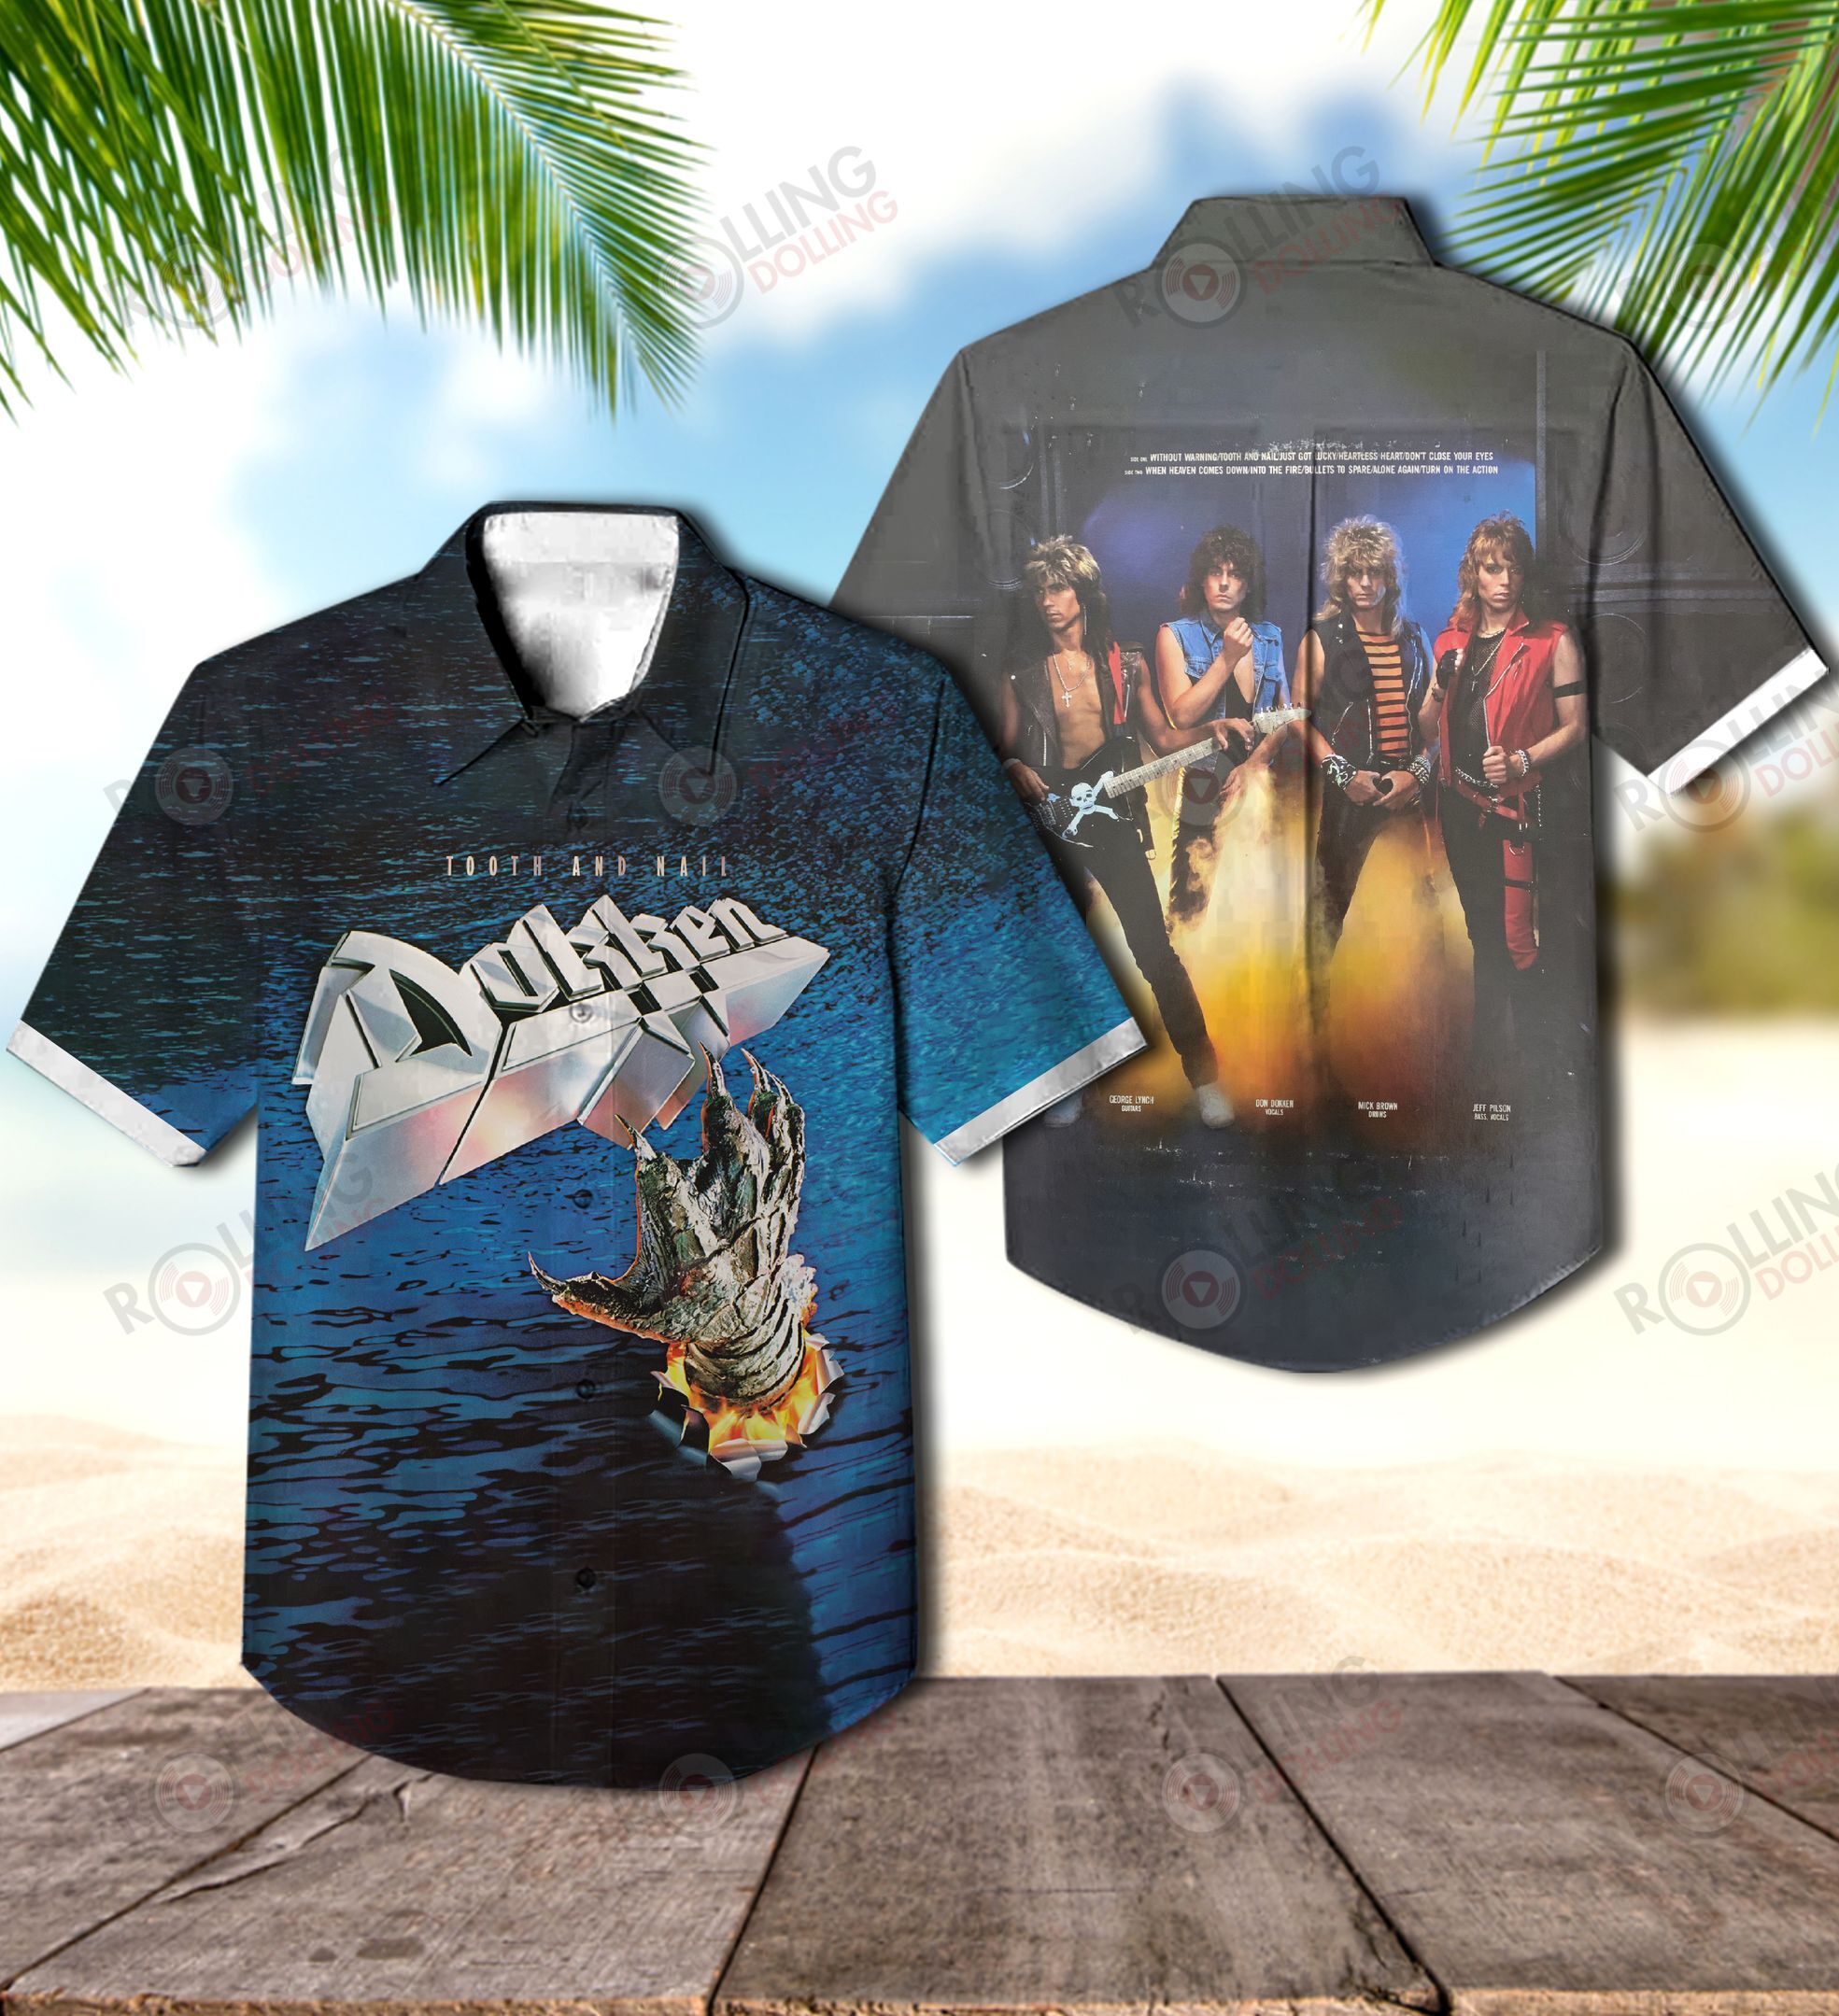 Check out these top 100+ Hawaiian shirt so cool for rock fans 187